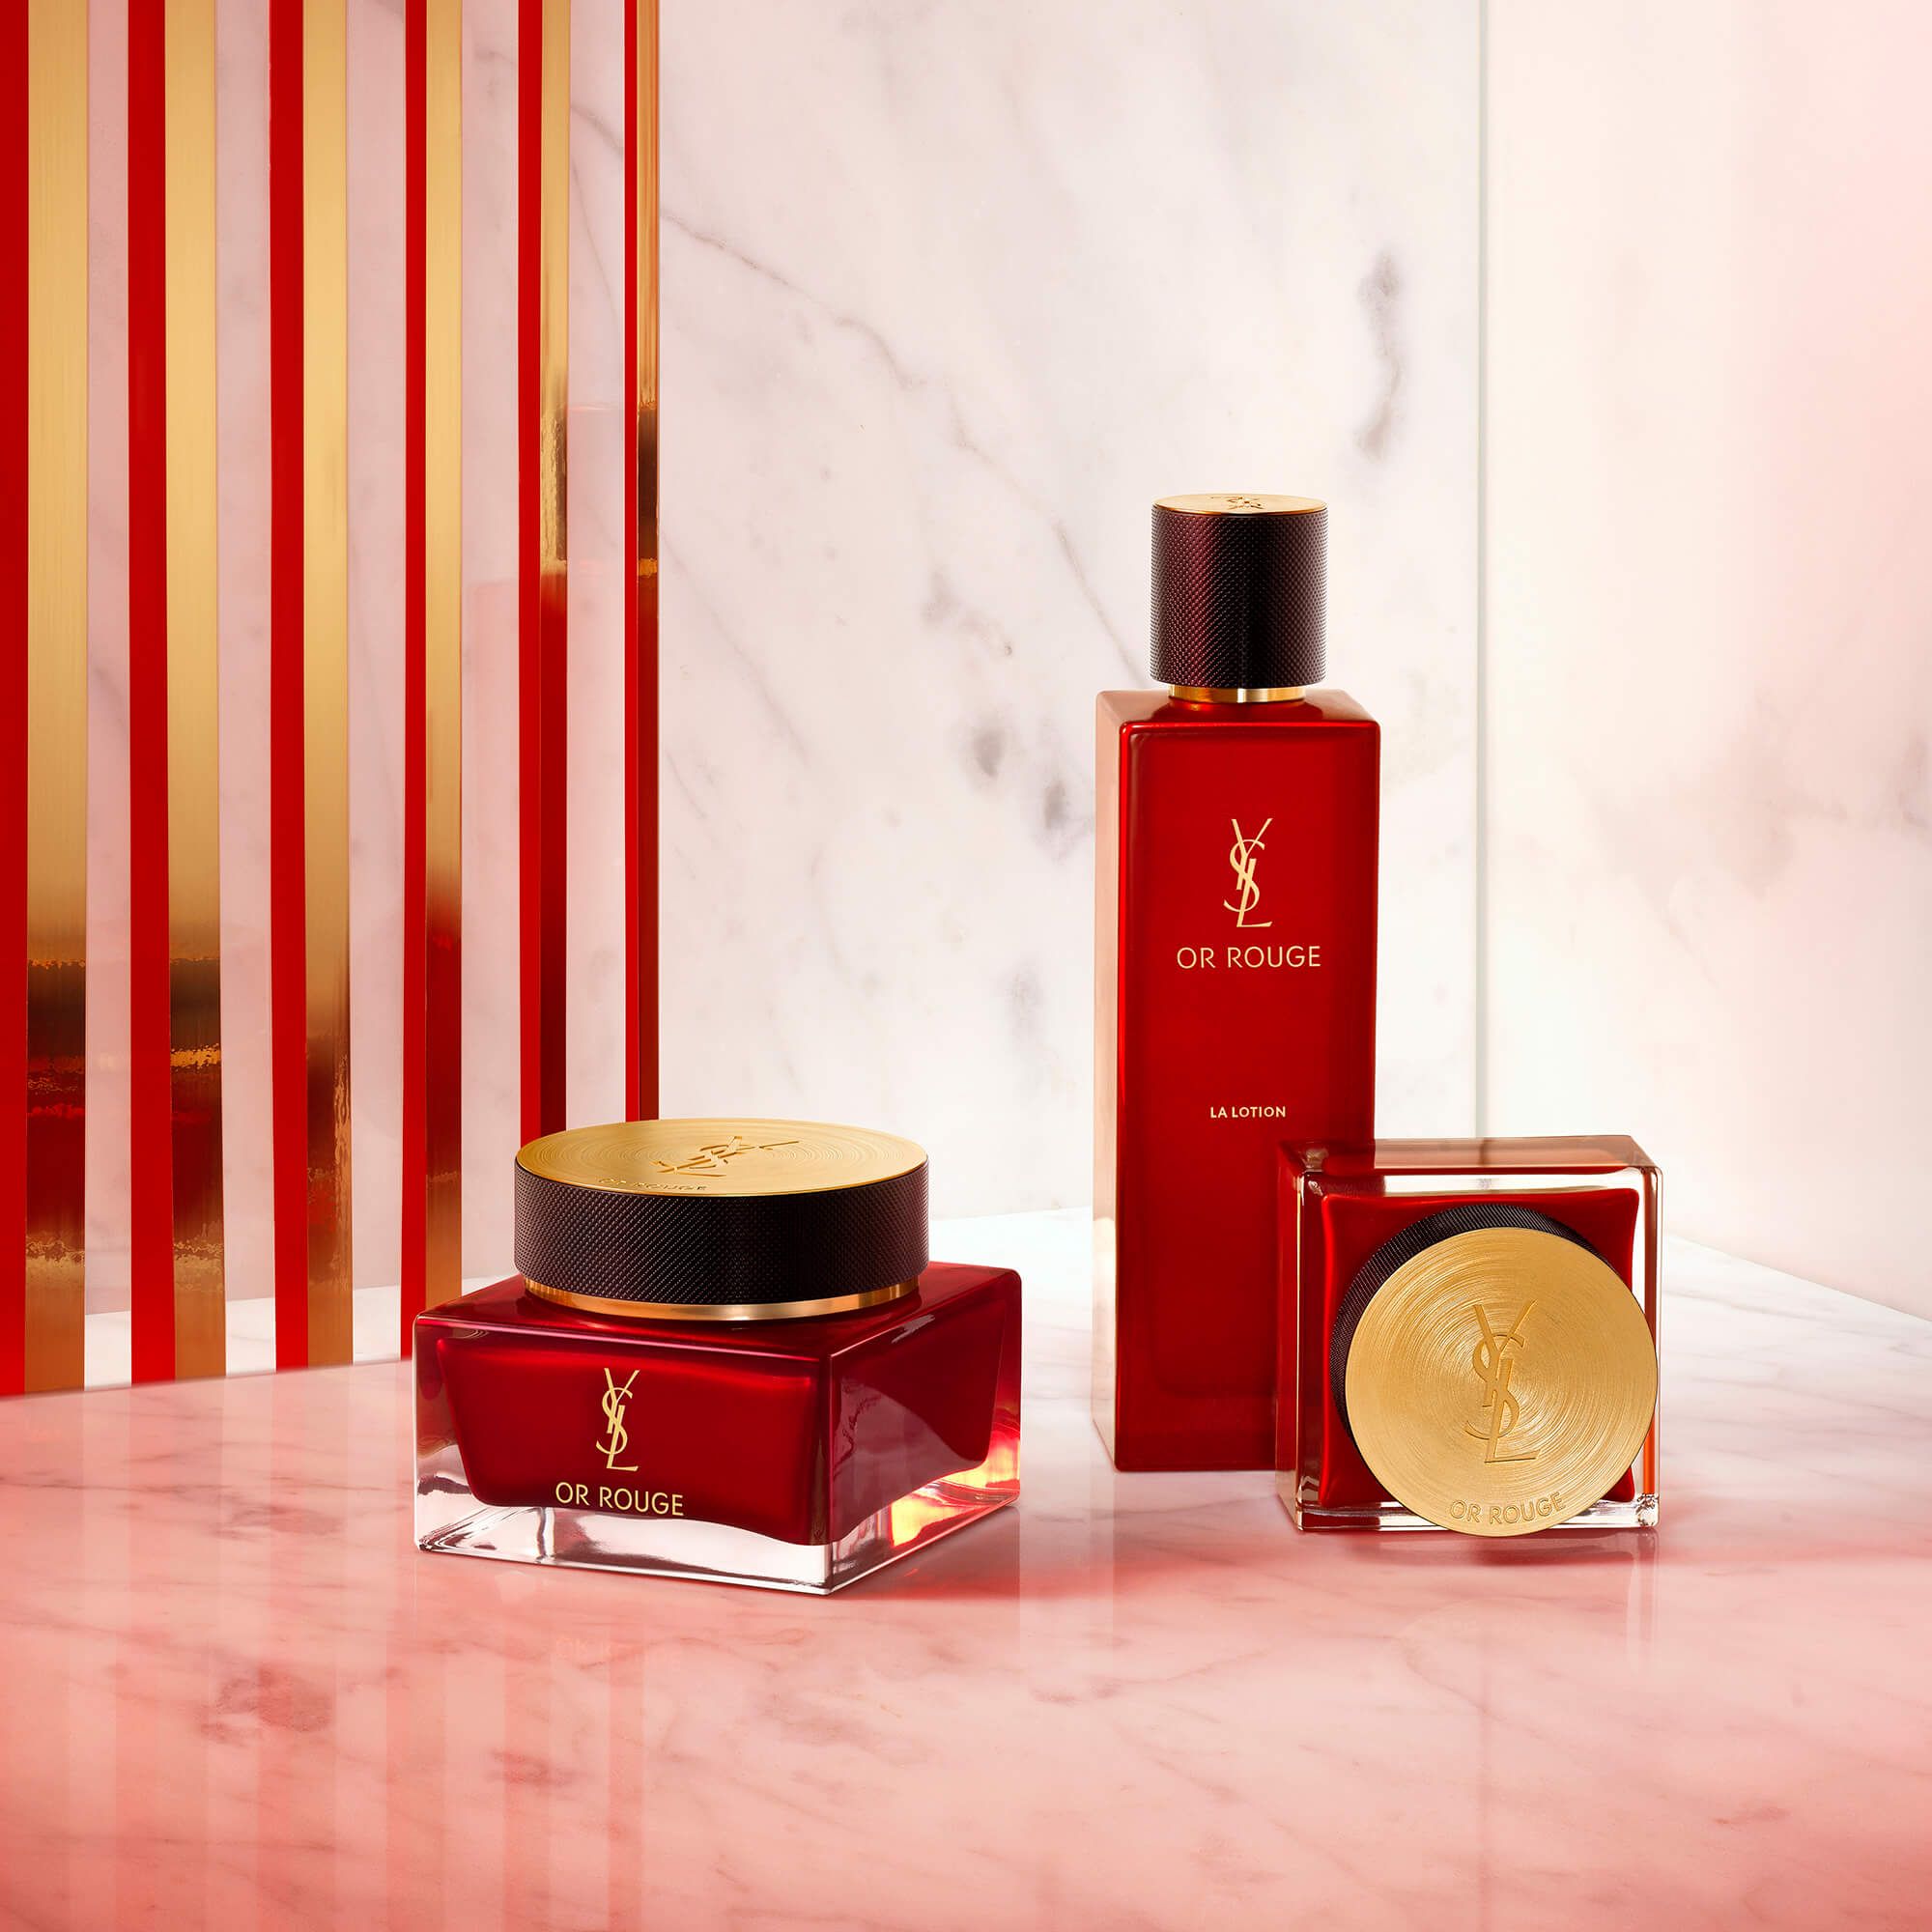 YSL Beauty — Or Rouge - Digital campaign